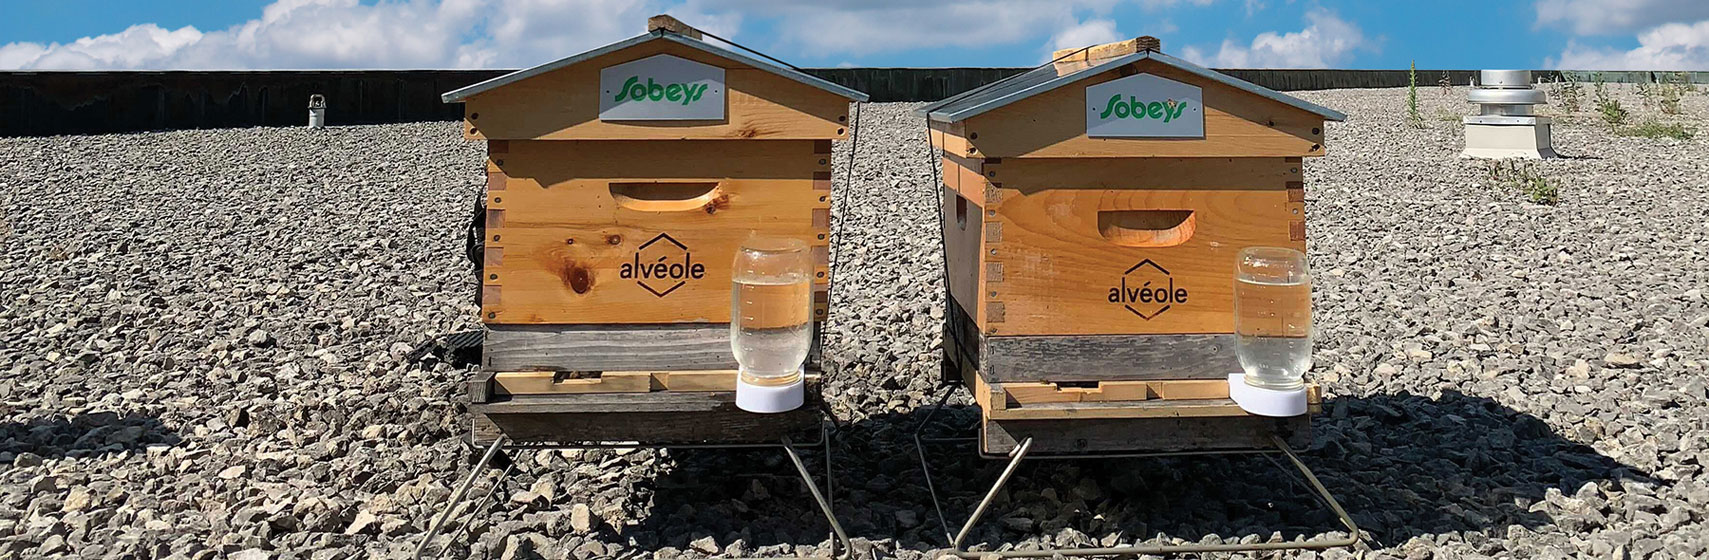 Two rooftop beehives branded with Sobeys and Alvéole are side-by-side on a rooftop in a towering city centre on a sunny day